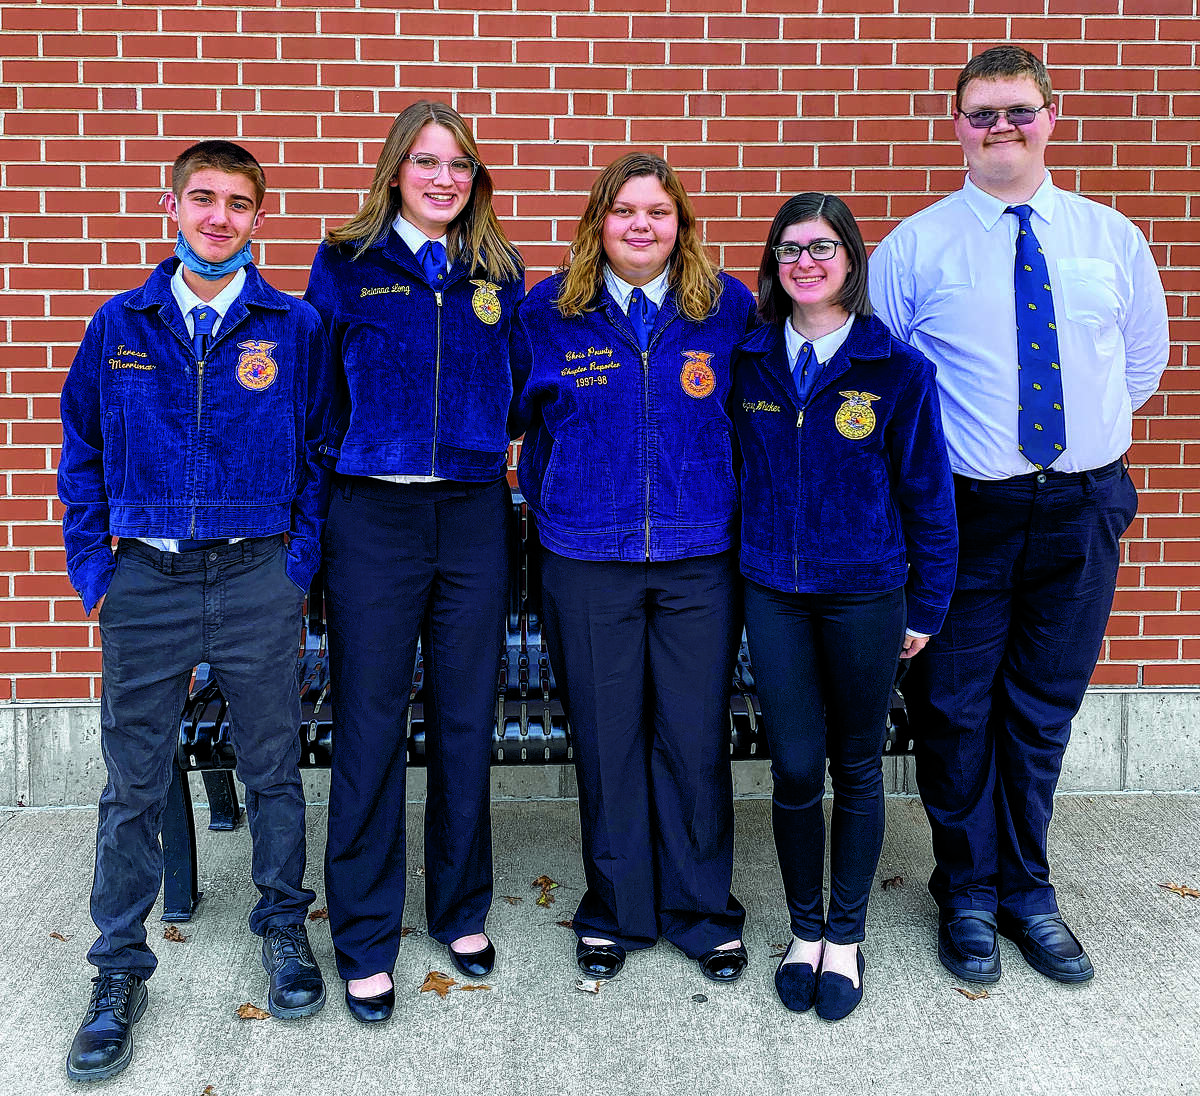 Five members of the Bluffs FFA chapter attended Leadership Training School on Sept. 29 in Pittsfield. They were Colton Coats (from left), Maeleigh Alexander, Jade Hamilton, Maggie Beddingfield and Thomas Fearneyhough.